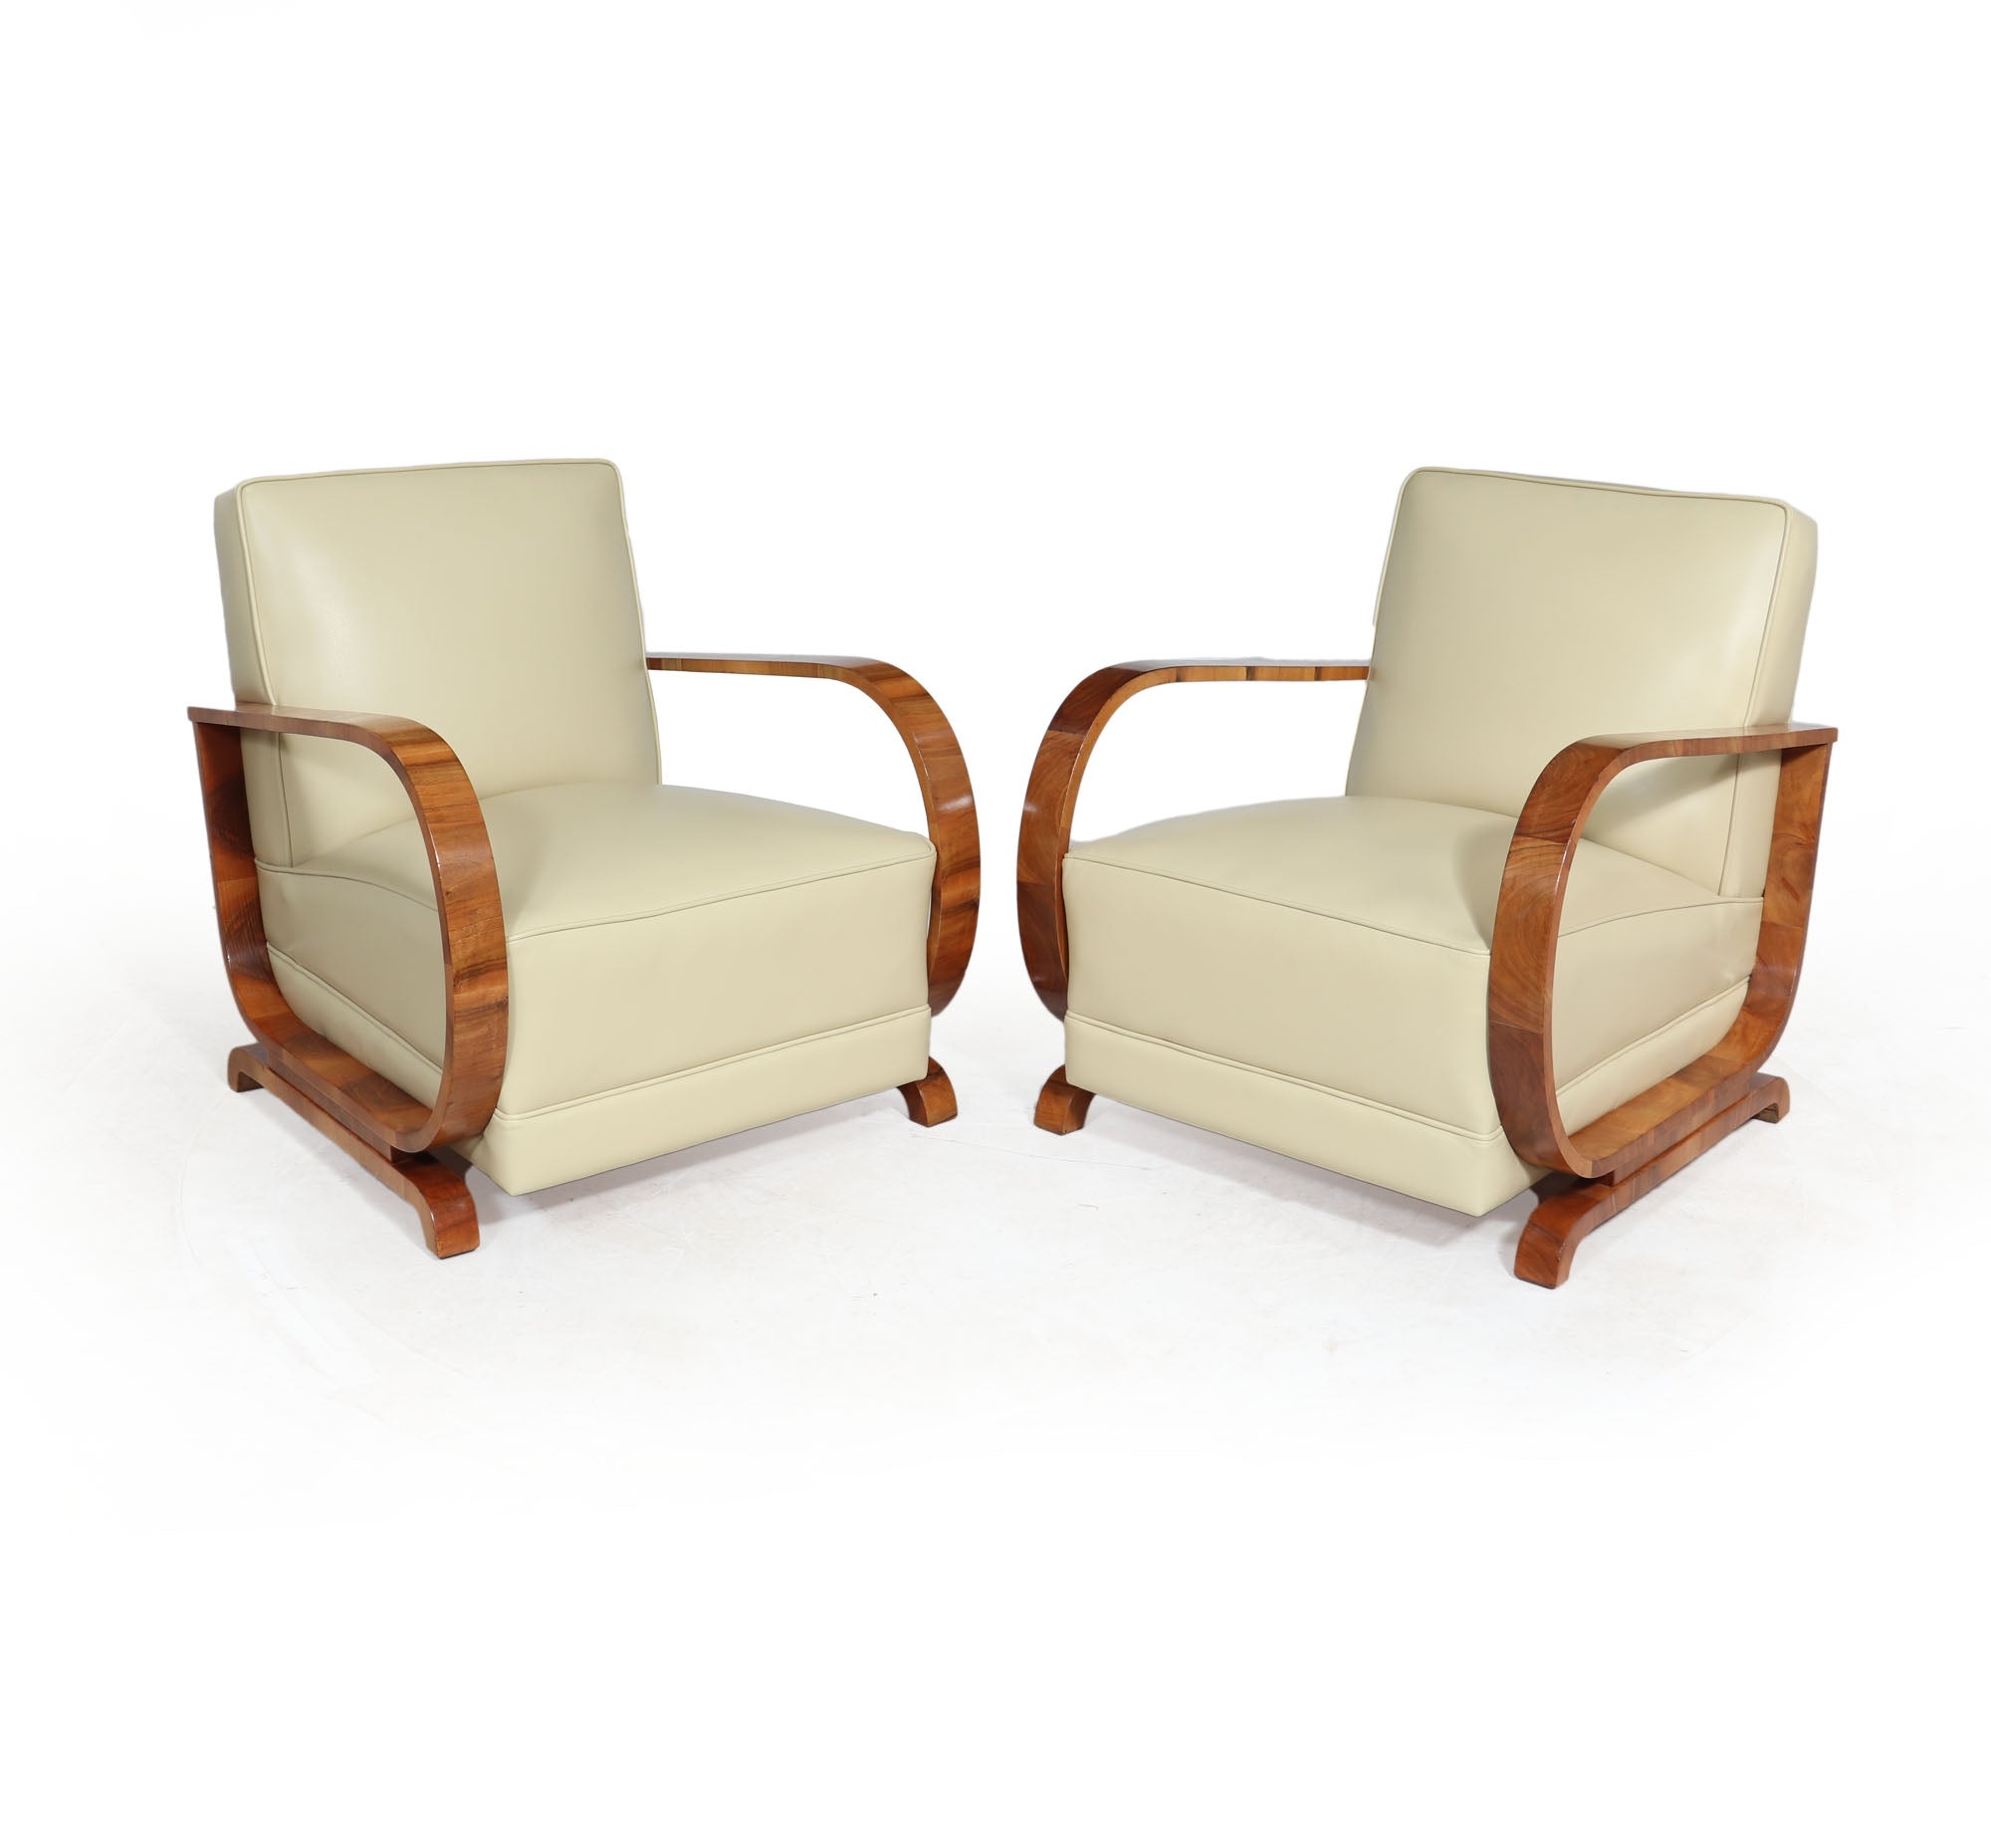 PAIR OF ART DECO LEATHER AND WALNUT ARMCHAIRS – The Furniture Rooms